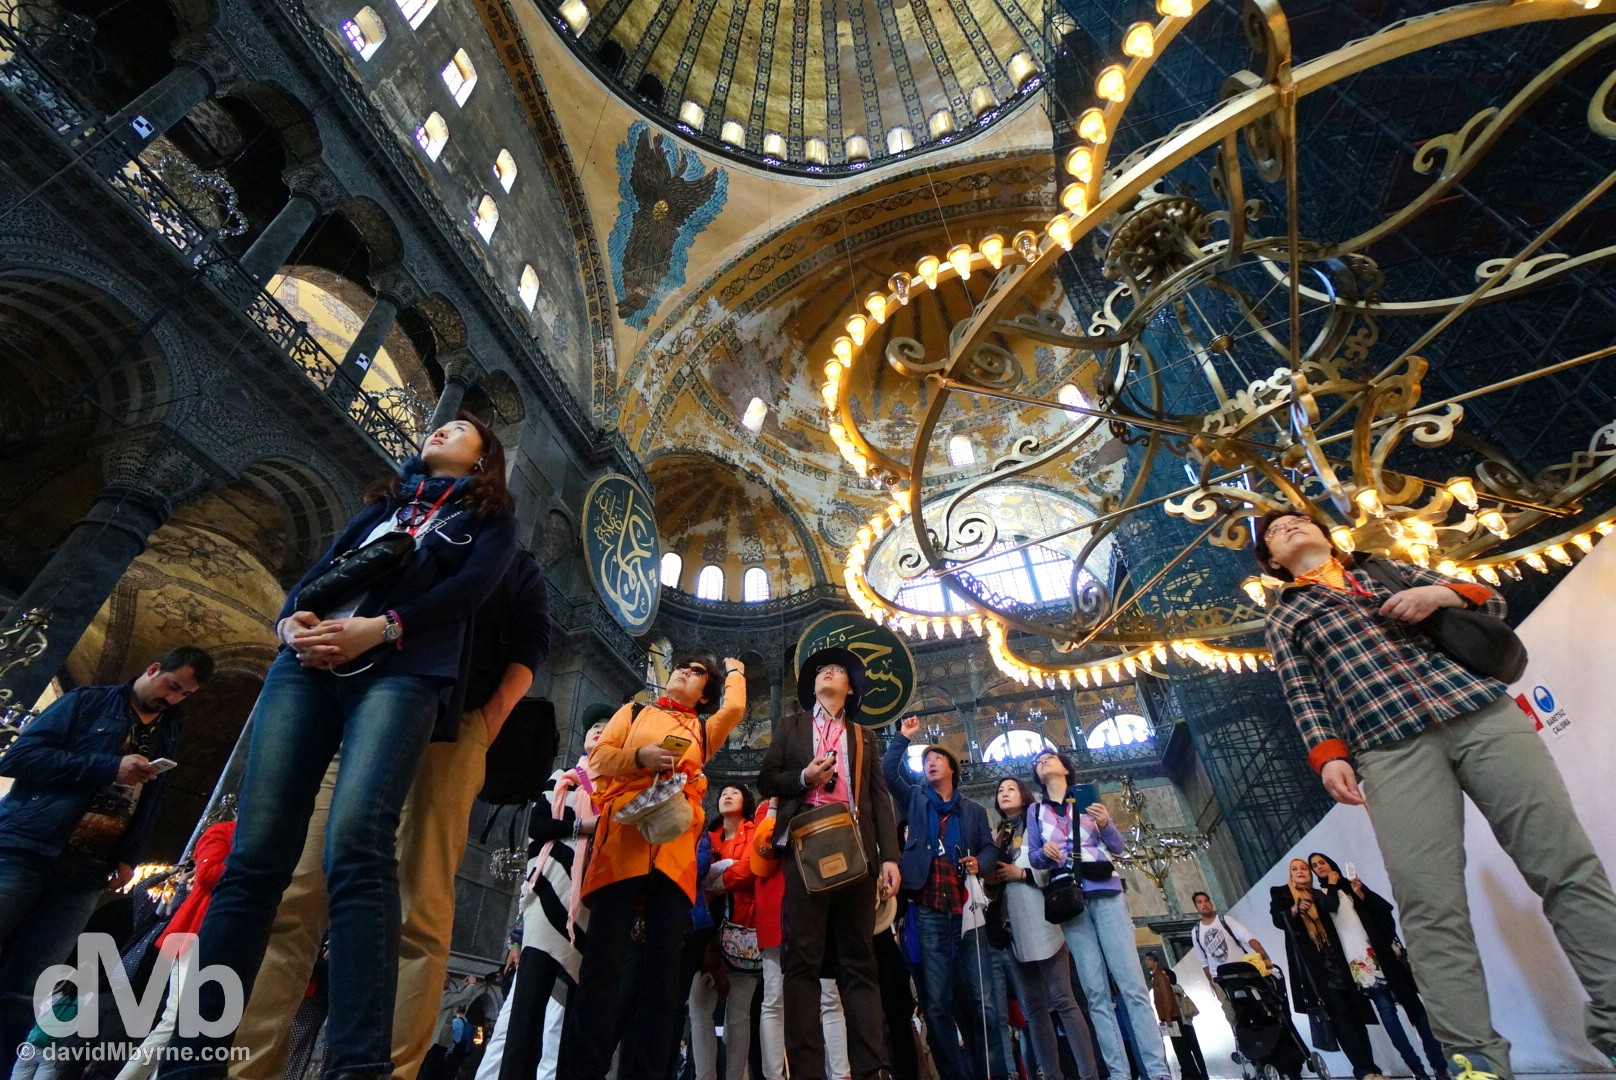 A group of flag-following Korean tourists admiring the interior of the Hagia Sophia in Istanbul, Turkey. April 10, 2014.